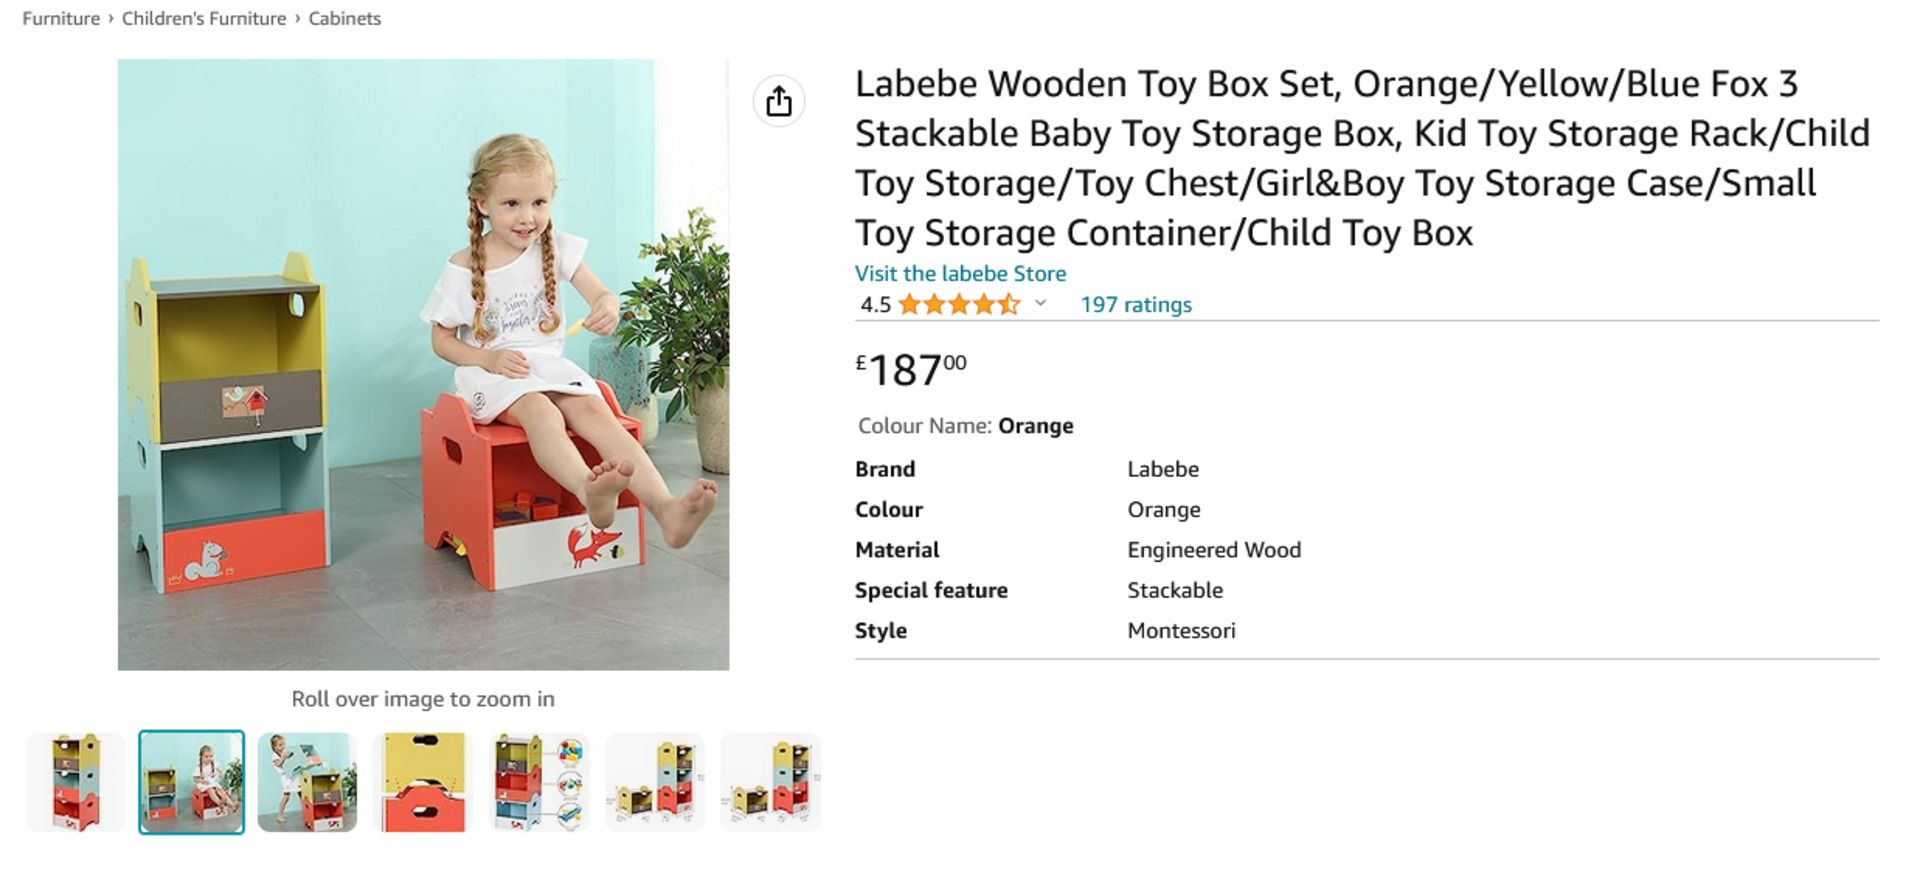 NEW LABEBE WOODEN TOY BOX SET - 3 STACKABLE BABY TOY STORAGE BOXES RRP £187 - Image 8 of 8